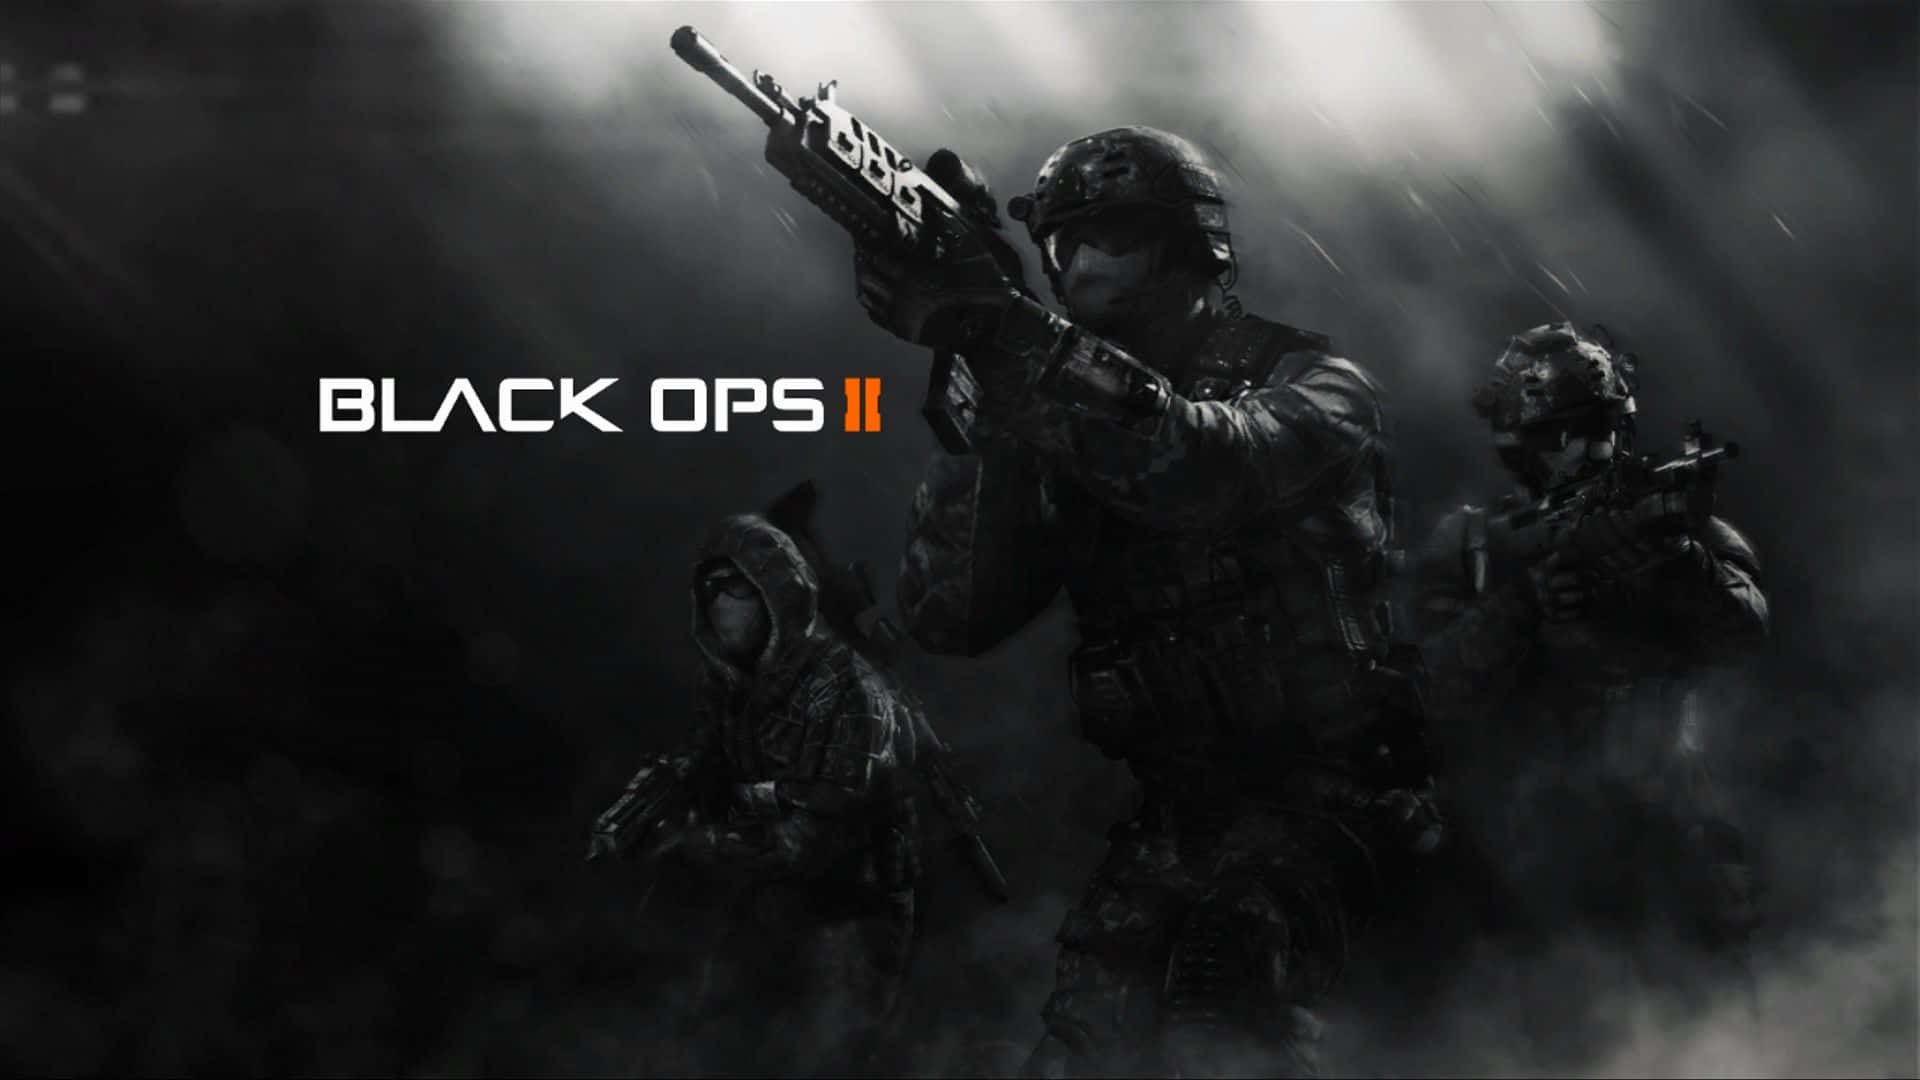 Call Of Duty Black Ops 2 Console Game Wallpaper